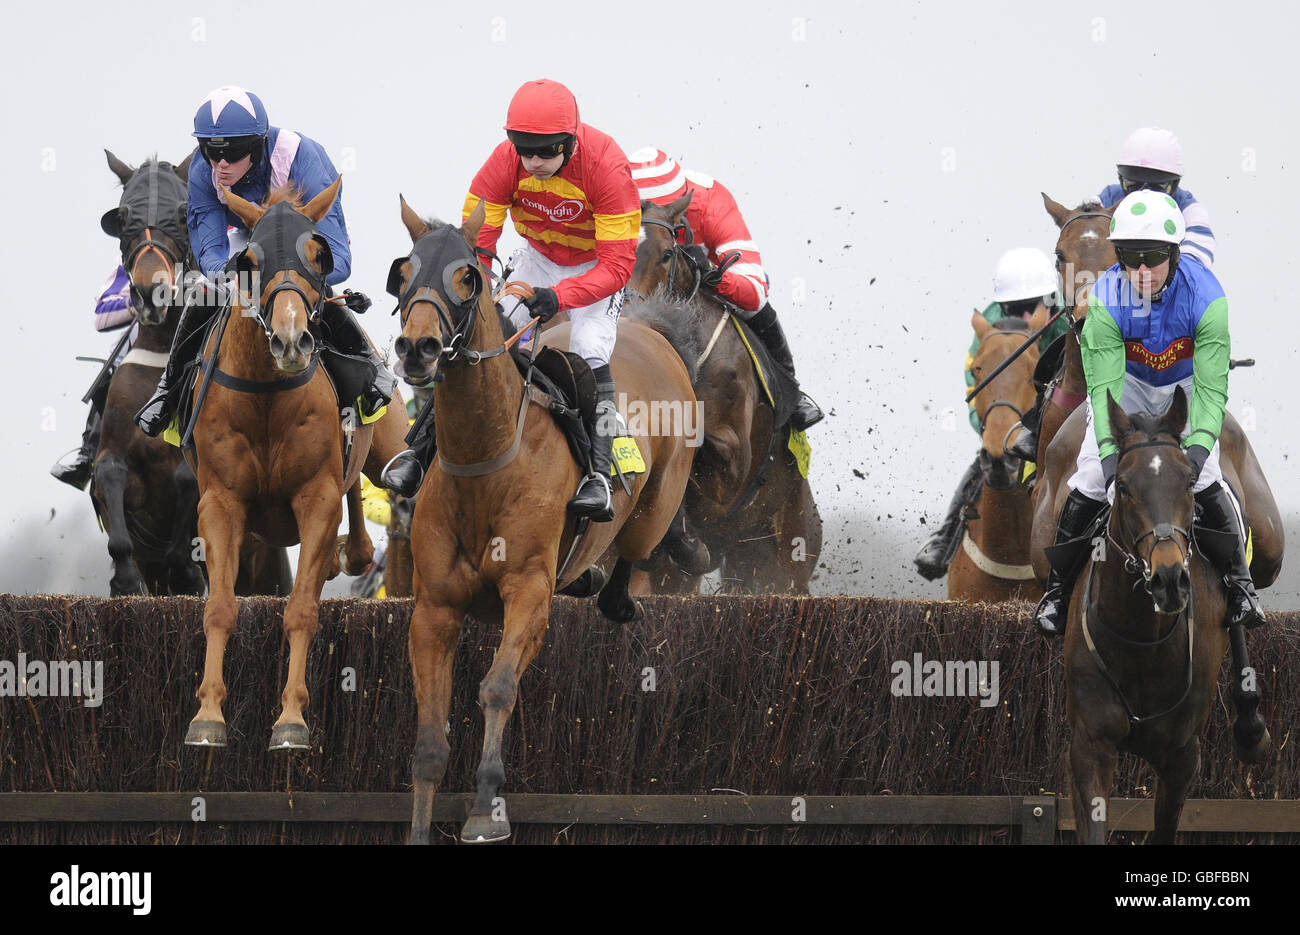 New Little Bric ridden by Nick Scholfield (left) takes the water jump before coming from behind to win The totspot.com Gold Cup Handicap Chase during totesport.com Gold Cup Day at Newbury Racecourse, Newbury. Stock Photo